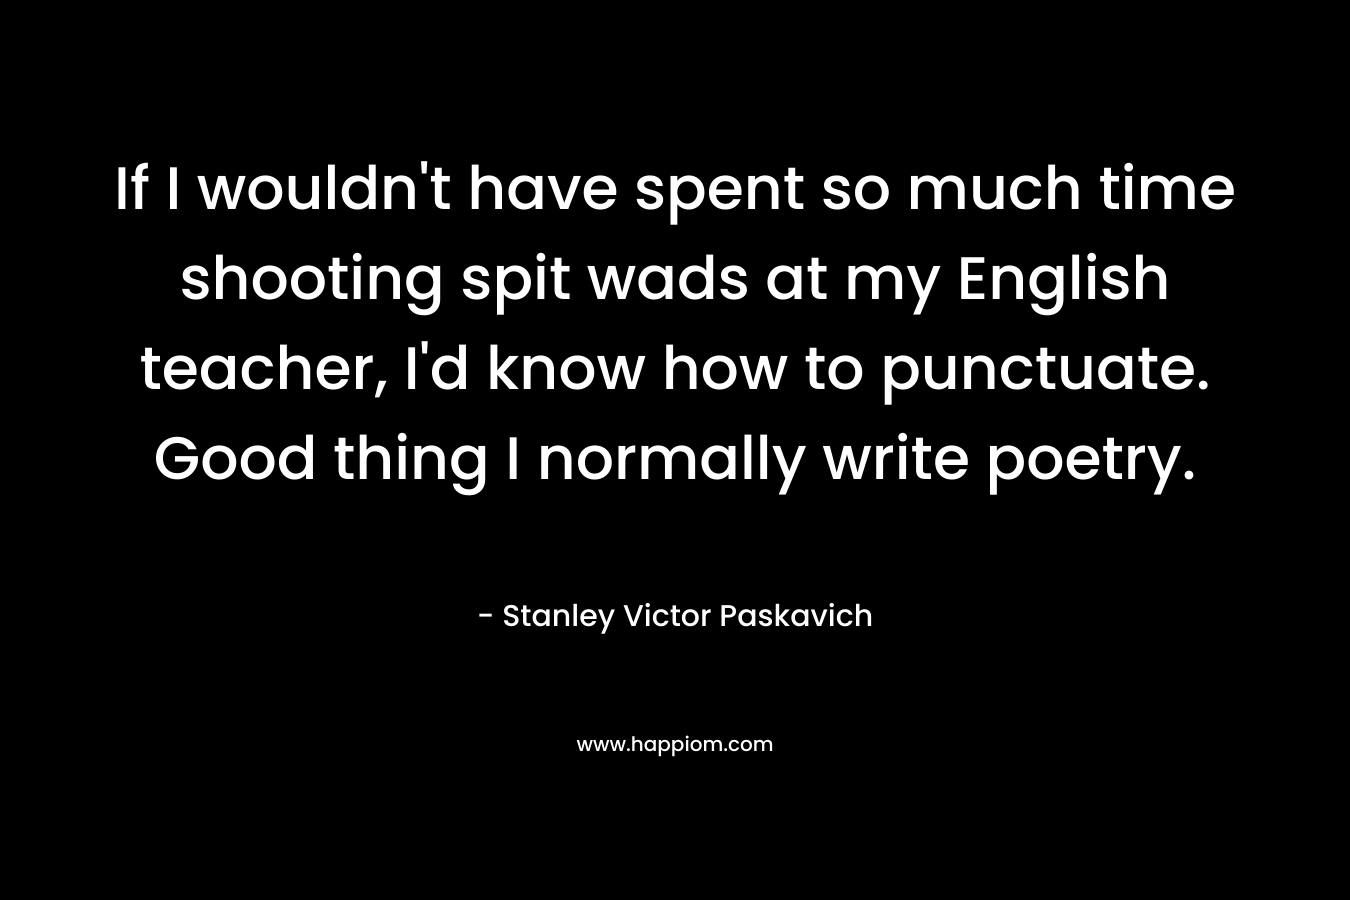 If I wouldn’t have spent so much time shooting spit wads at my English teacher, I’d know how to punctuate. Good thing I normally write poetry. – Stanley Victor Paskavich